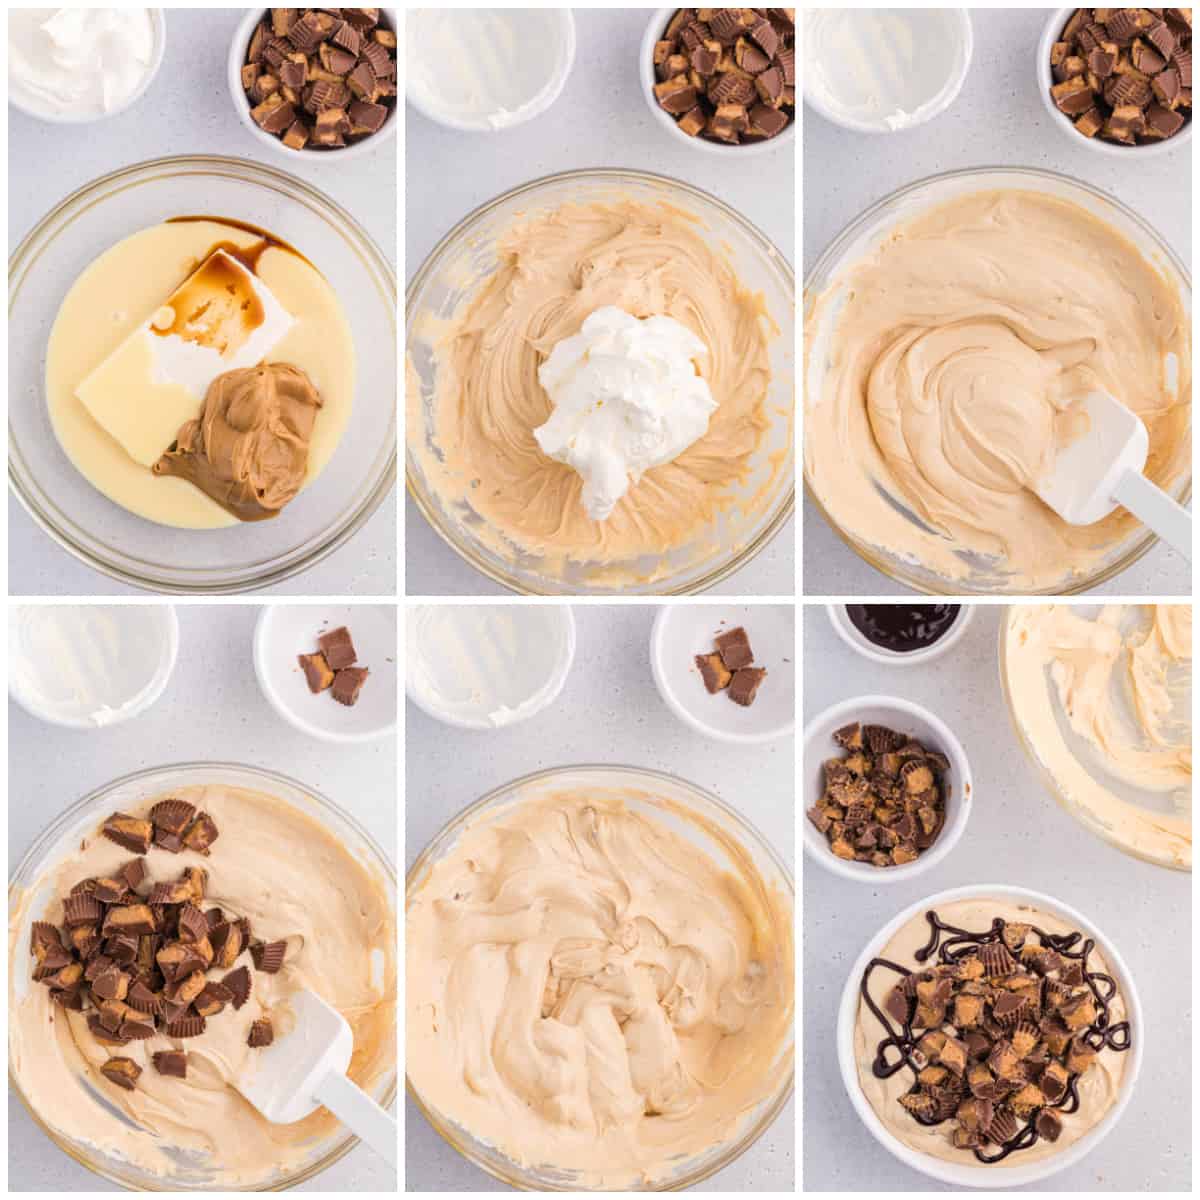 Step by step photos on how to make Reese's Cheesecake Dip.